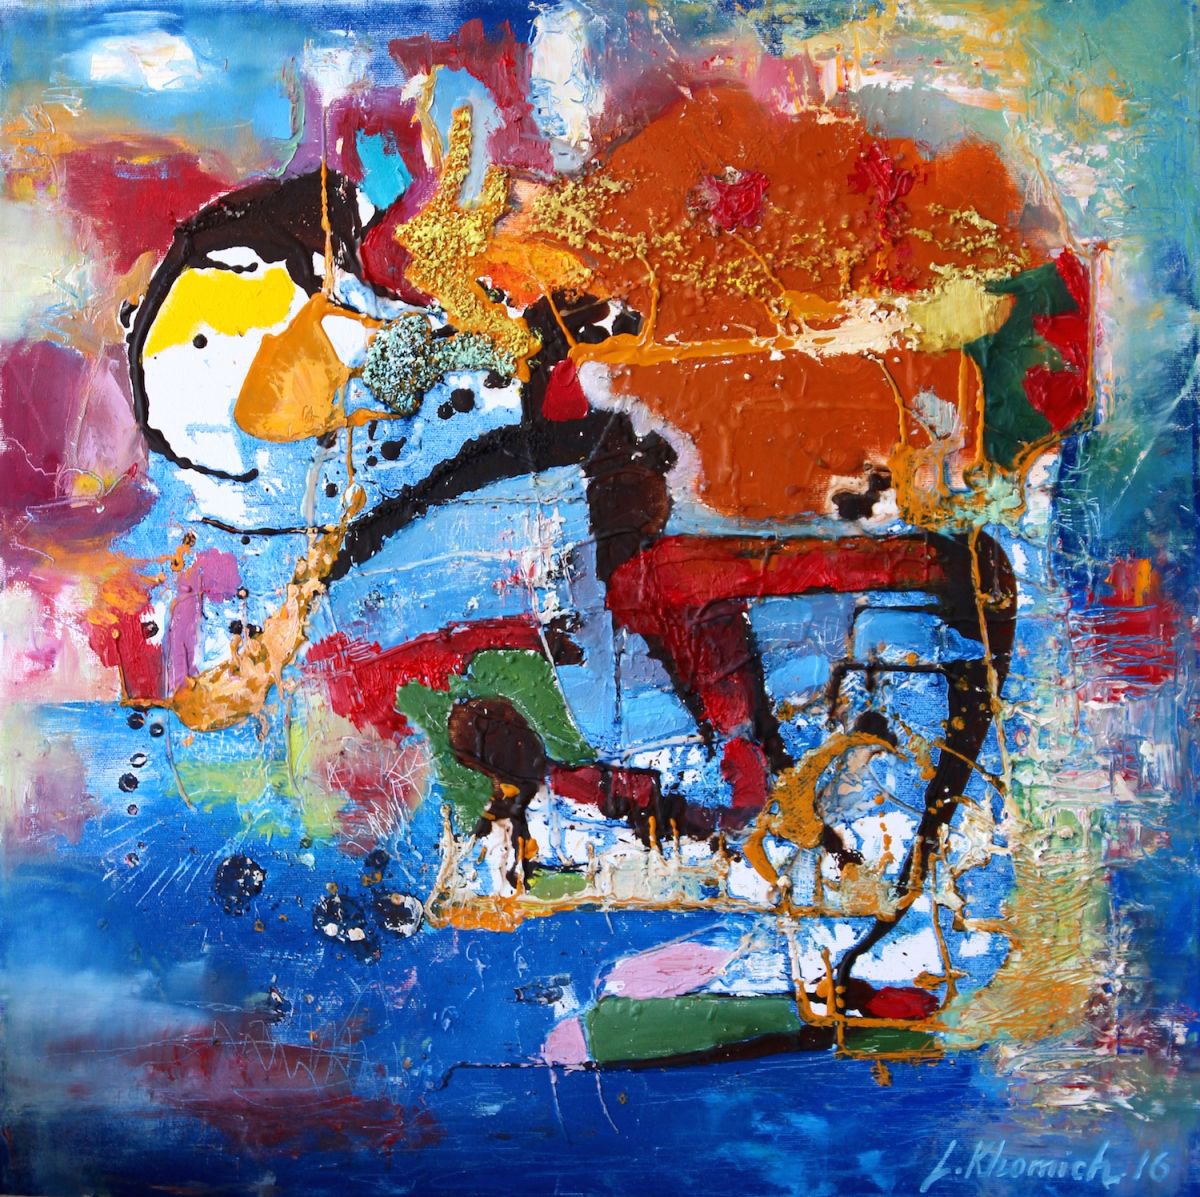 Olympic Champion Abstract Painting Contemporary Art 60x60cm Original Abstract Paintings Bl... by Leo Khomich